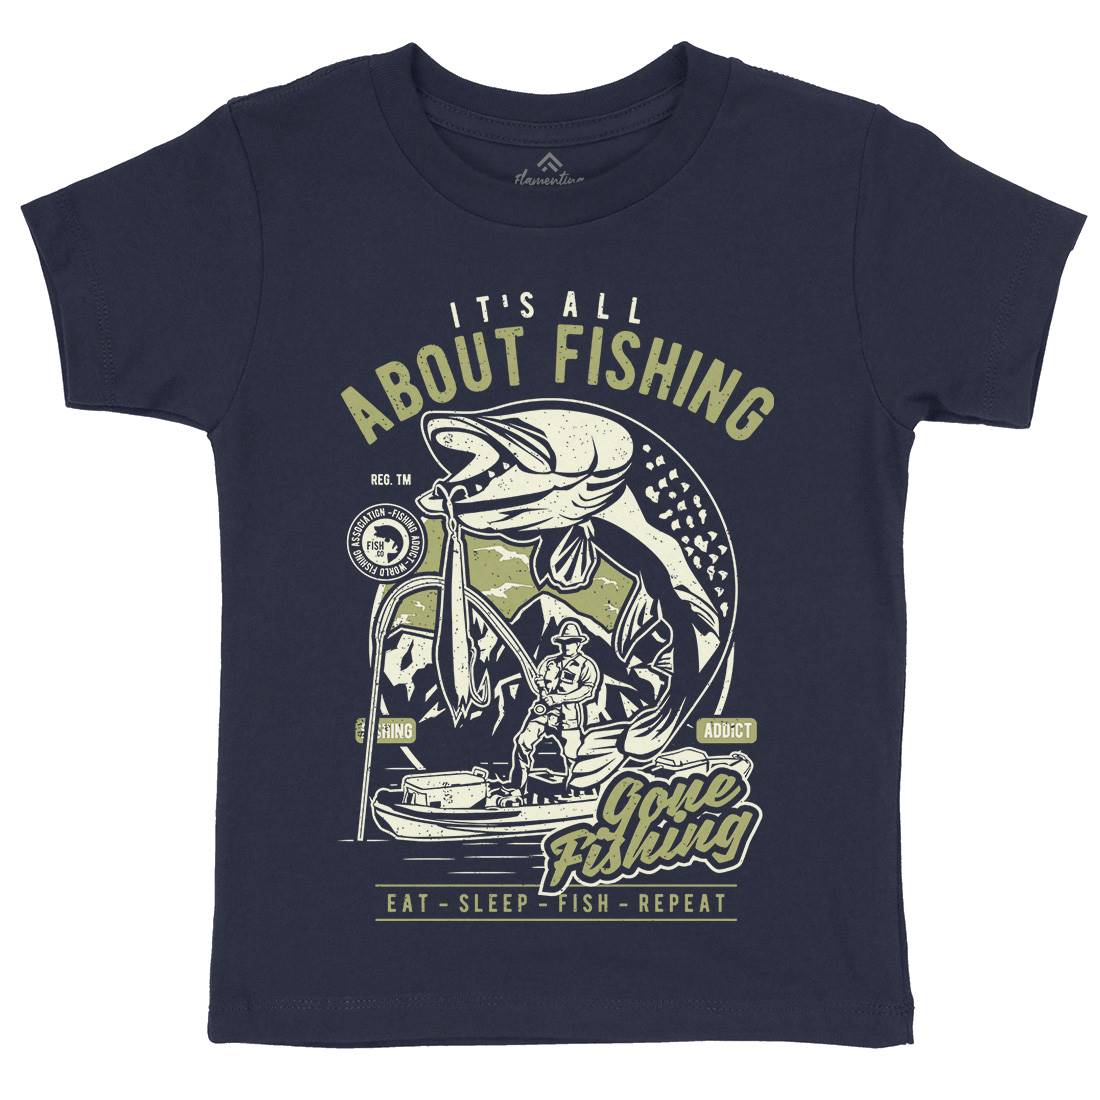 All About Kids Crew Neck T-Shirt Fishing A604 - Flamentina